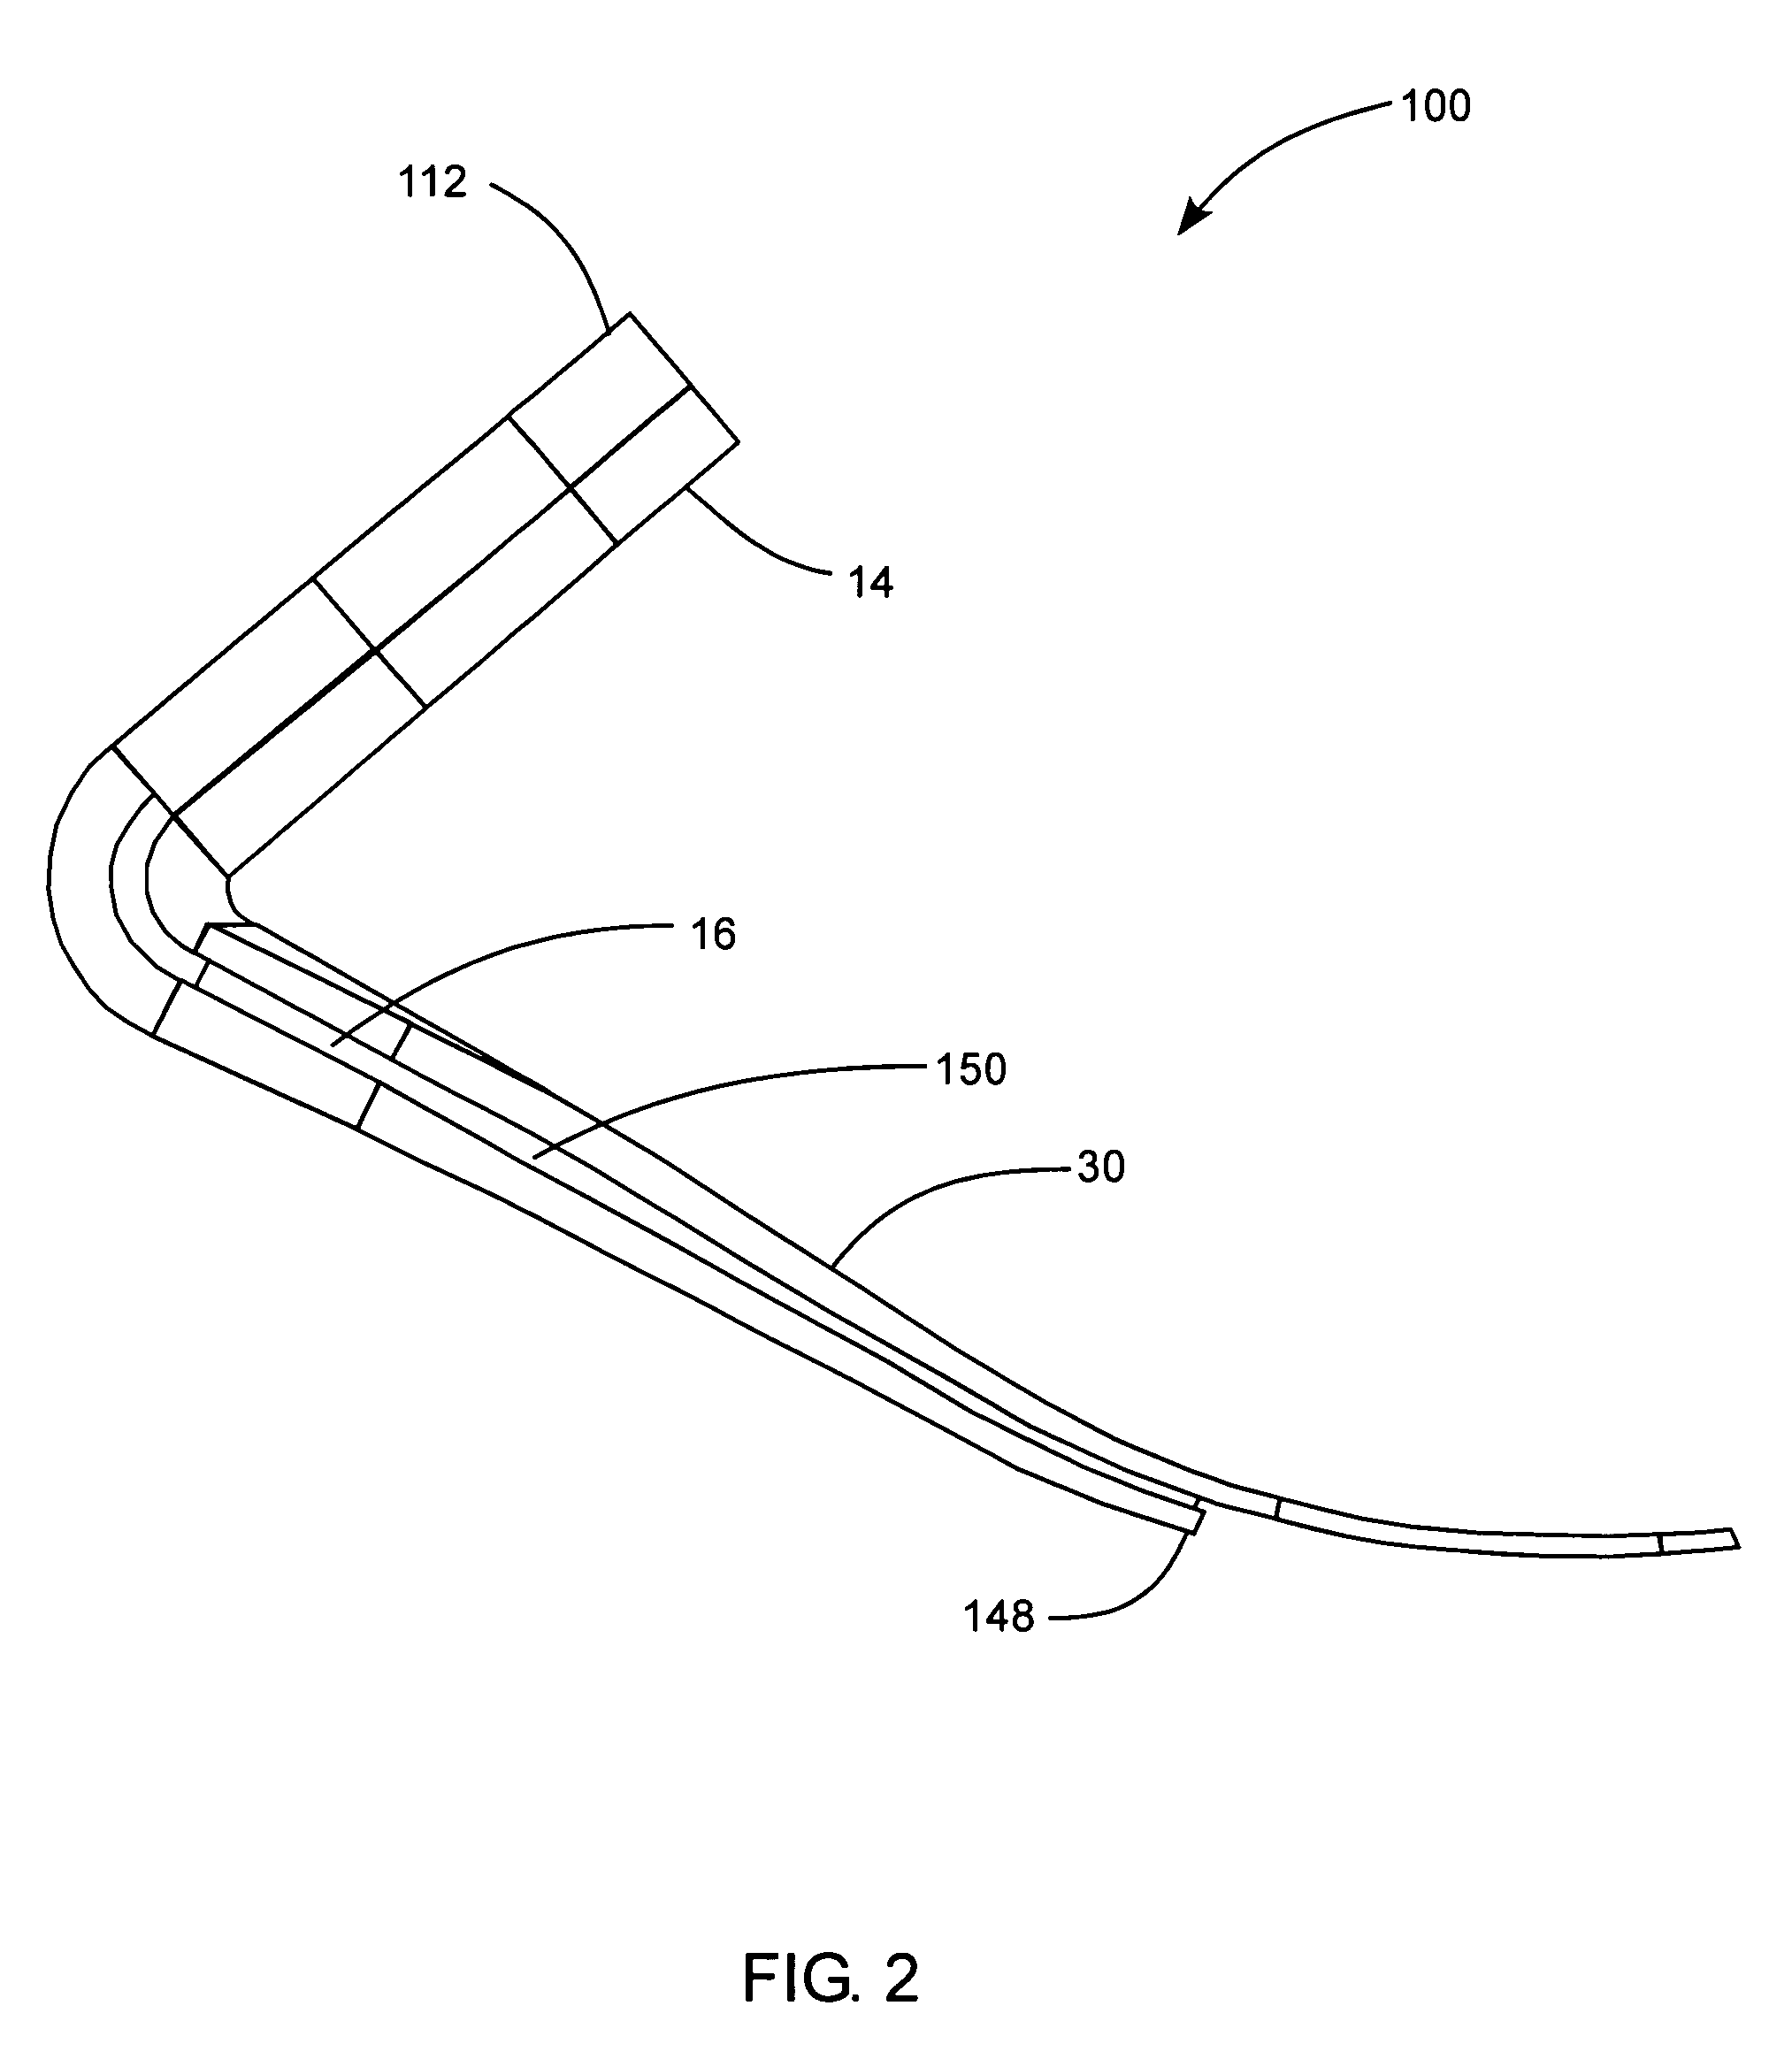 Prosthetic foot with longer upper forefoot and shorter lower forefoot